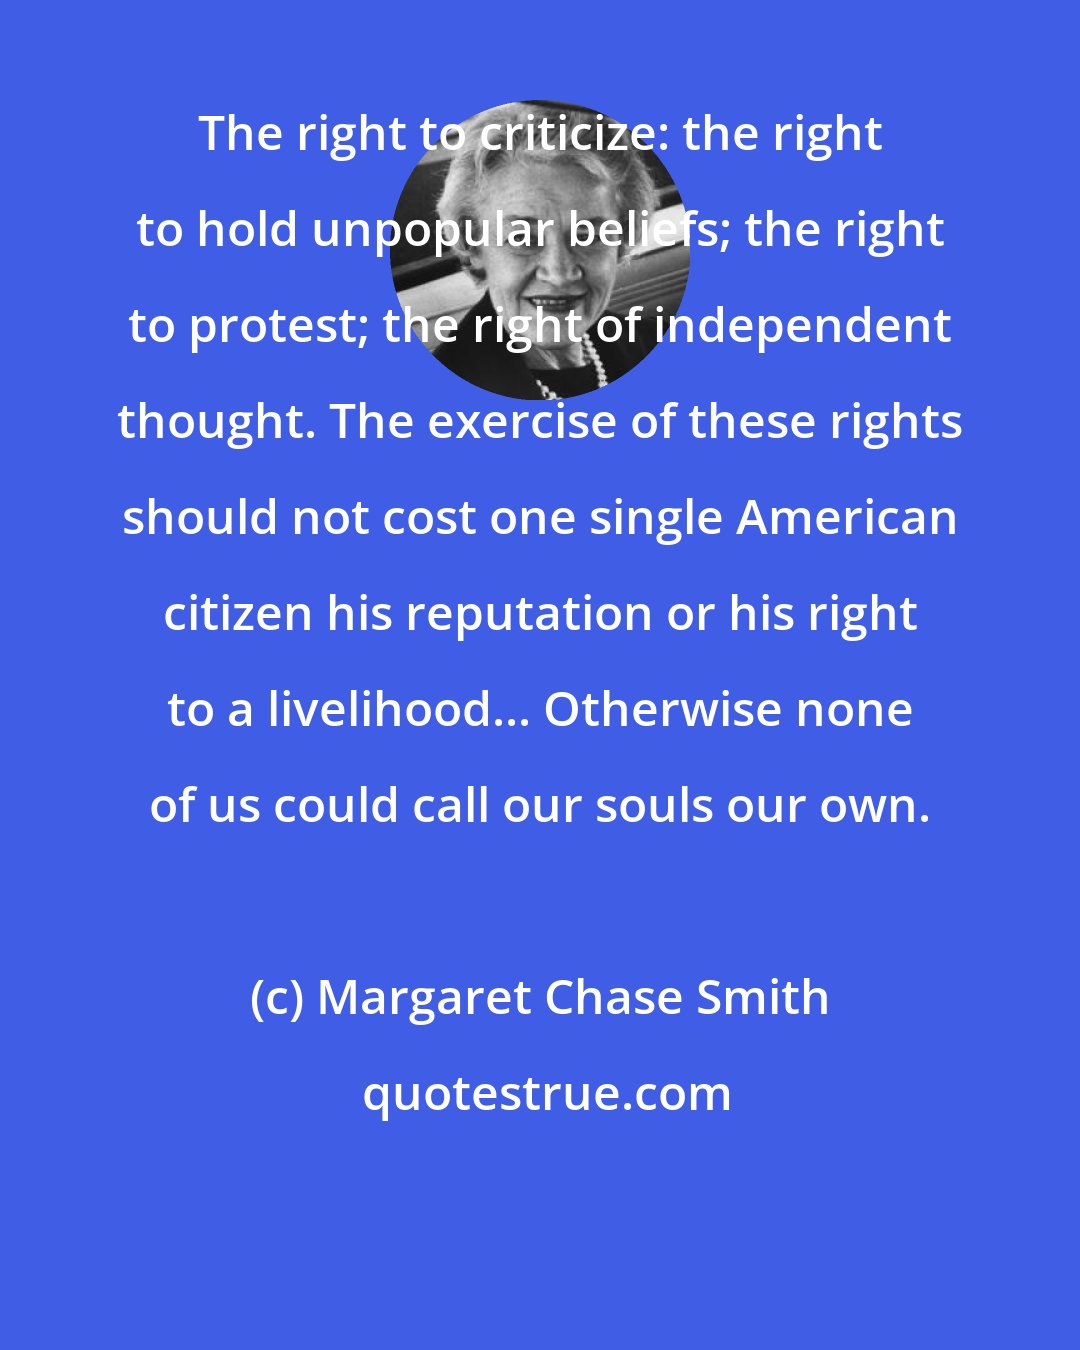 Margaret Chase Smith: The right to criticize: the right to hold unpopular beliefs; the right to protest; the right of independent thought. The exercise of these rights should not cost one single American citizen his reputation or his right to a livelihood... Otherwise none of us could call our souls our own.